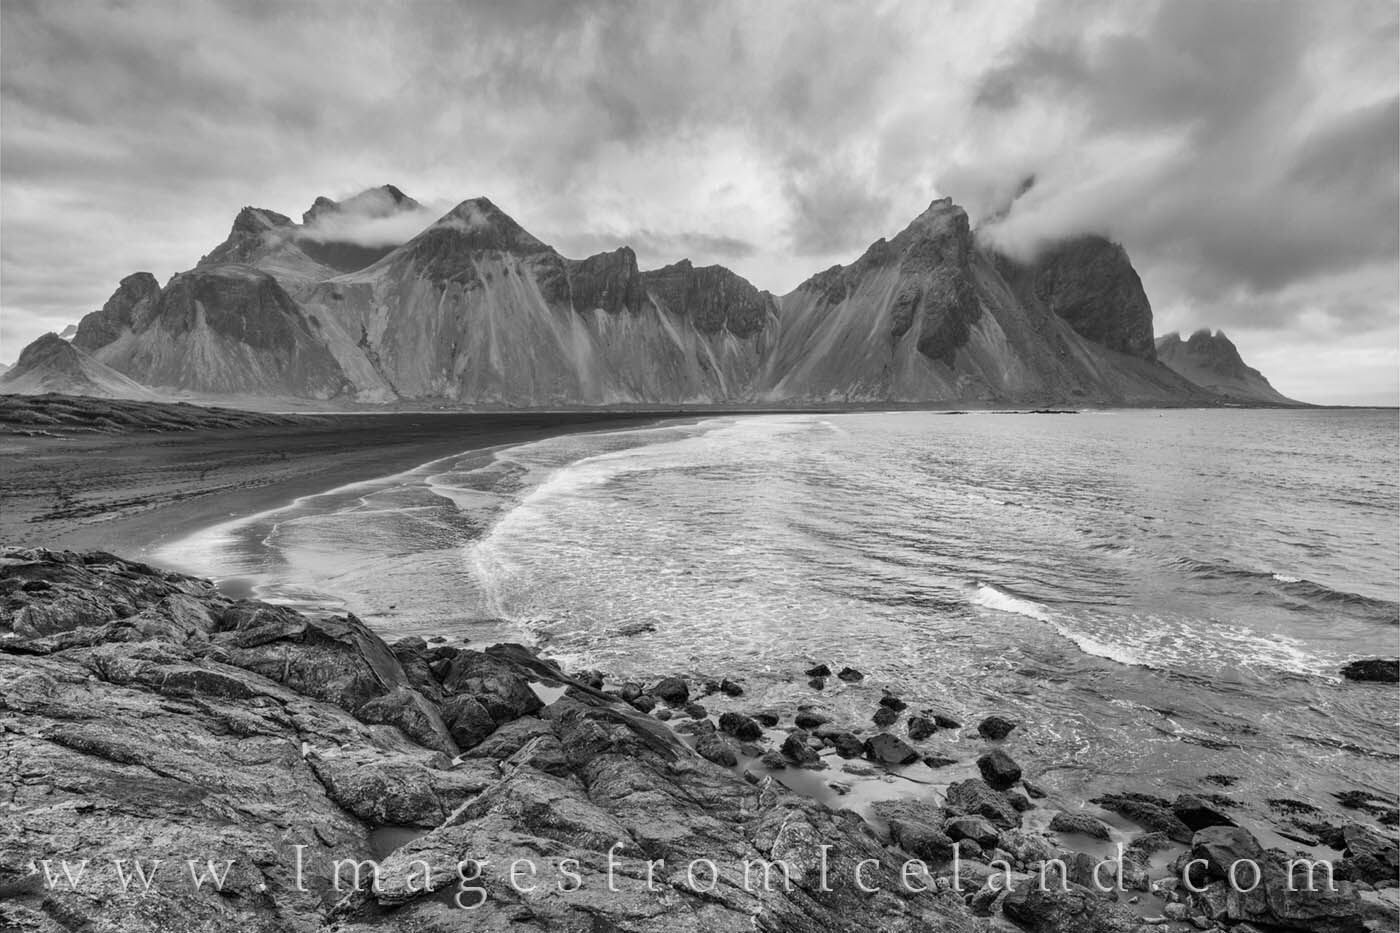 On a cold June morning, the Vestrahorn’s craggy peaks rise into the low clouds. Not far from the town of Höfn, this beautiful...